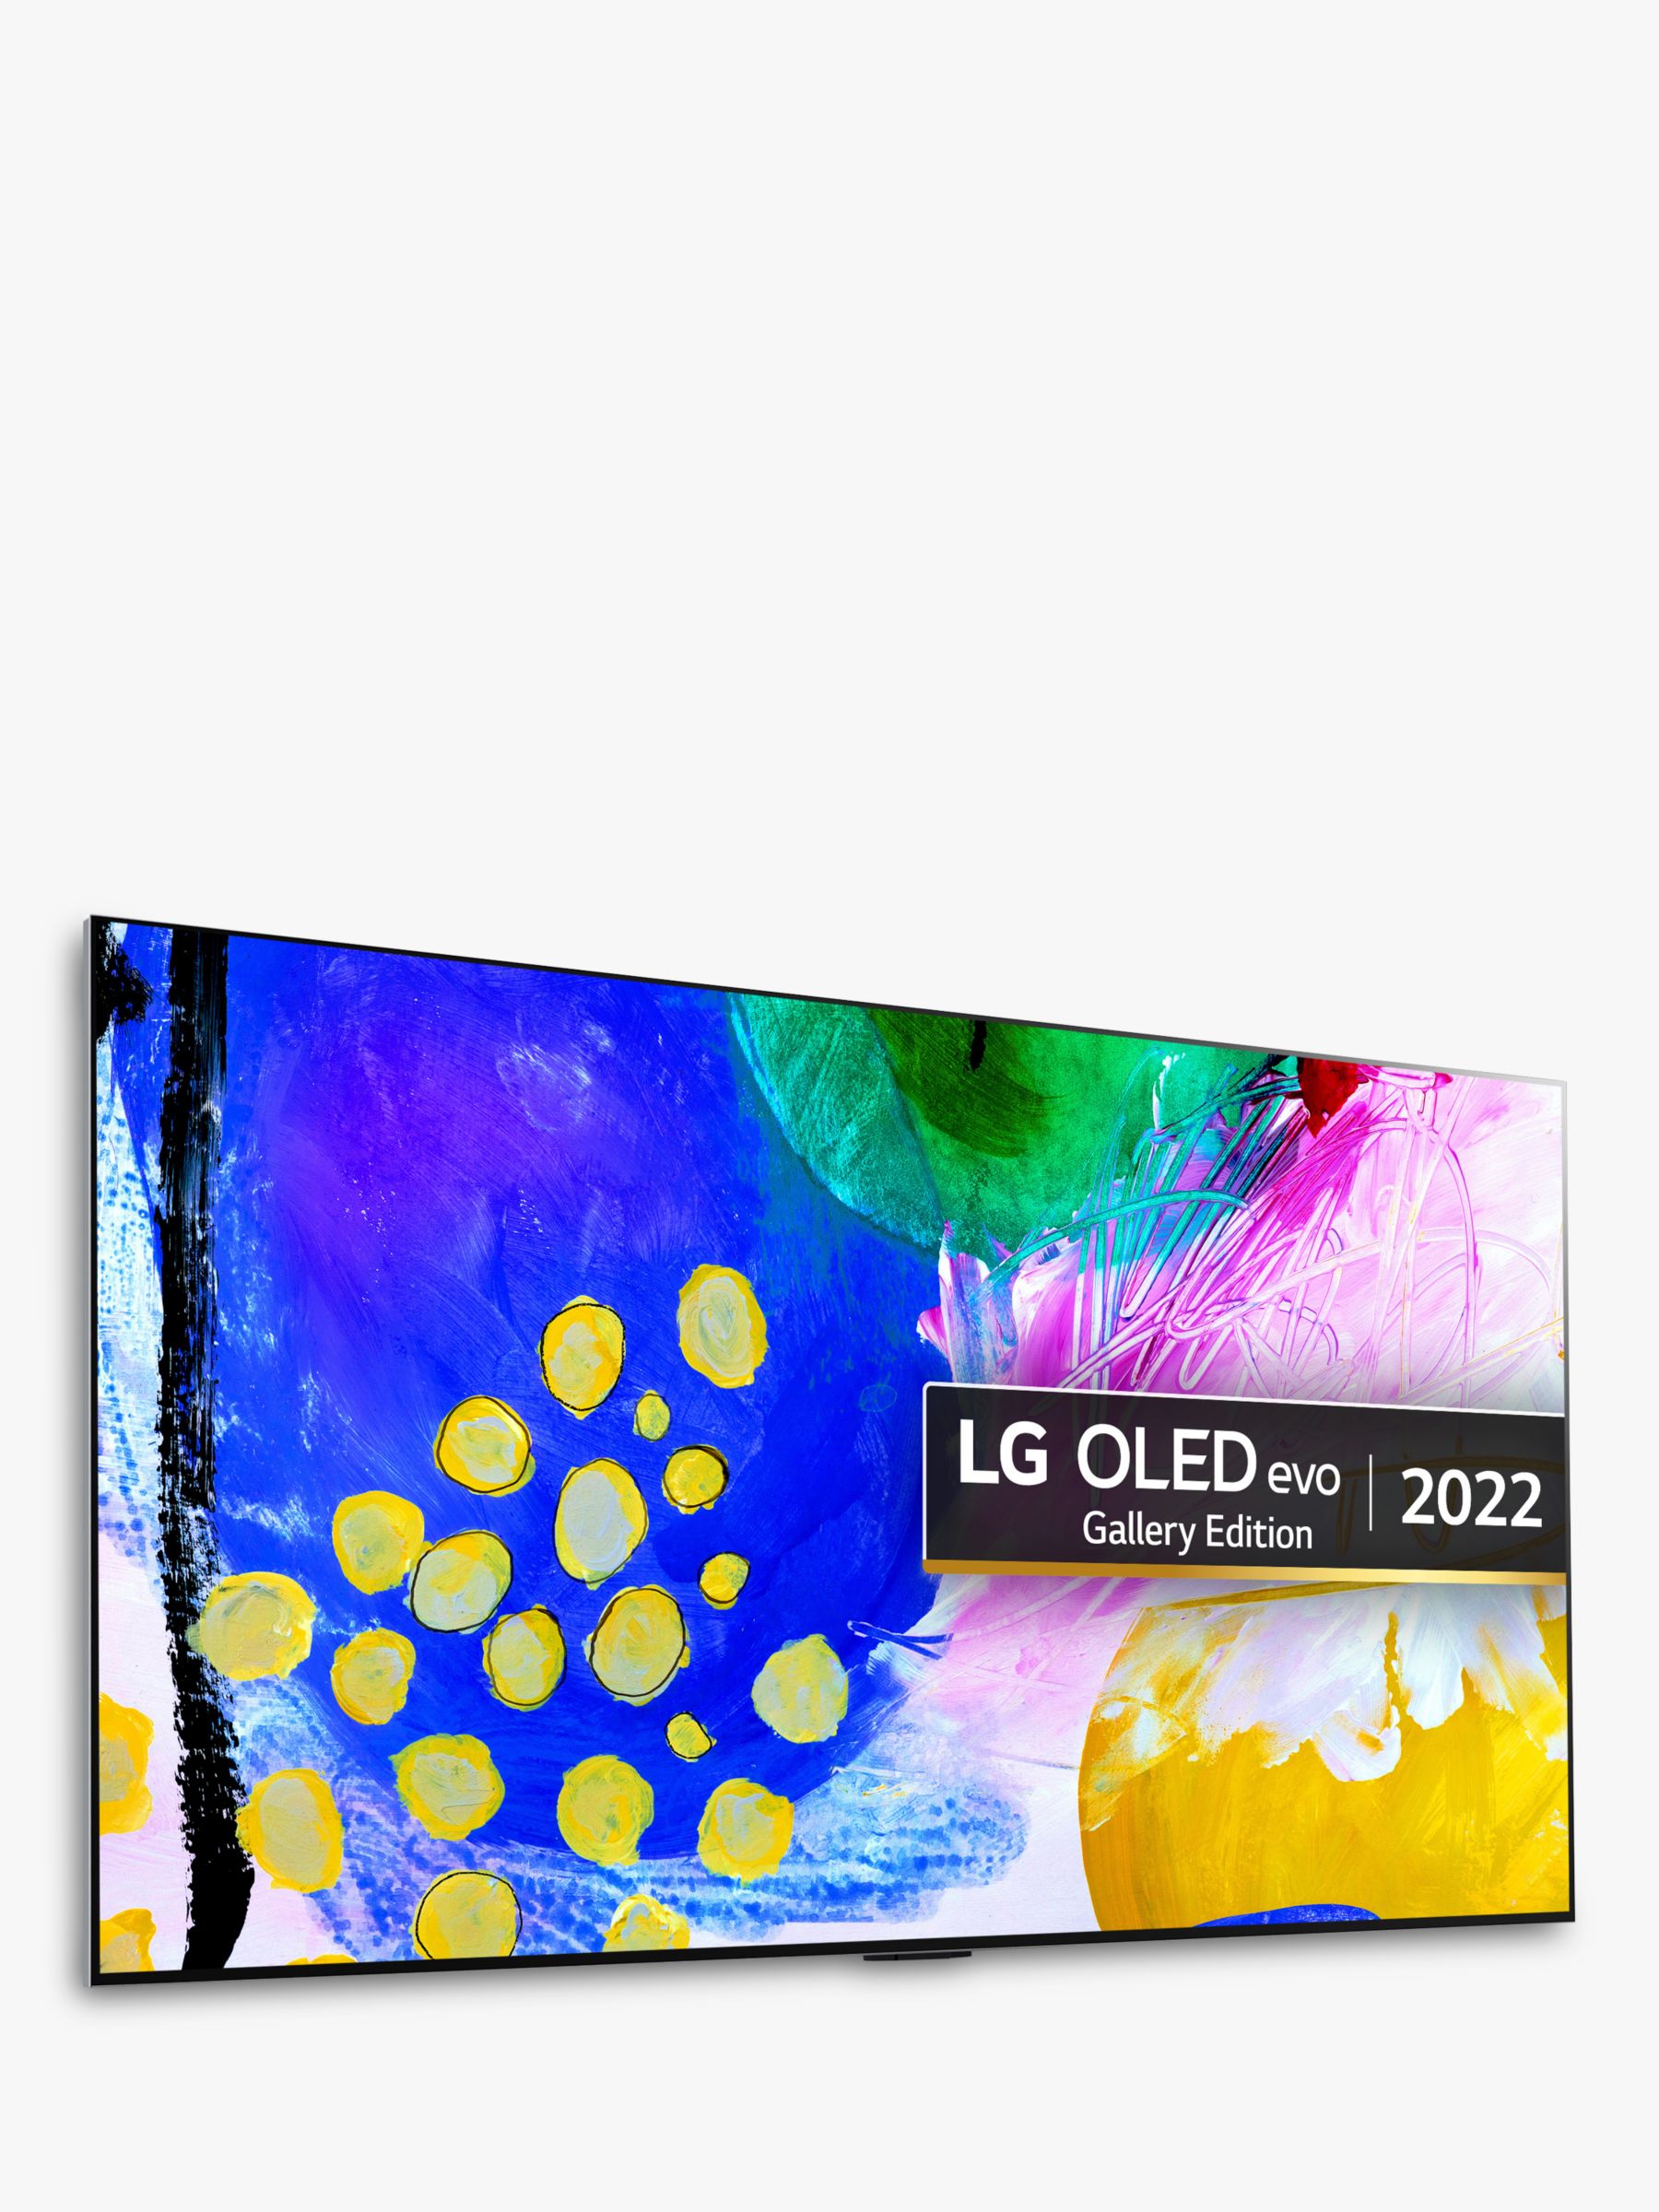 LG OLED65G26LA (2022) OLED HDR 4K Ultra HD Smart TV, 65 inch with Freeview HD/Freesat HD, Dolby Atmos & Gallery Design, Light Satin Silver